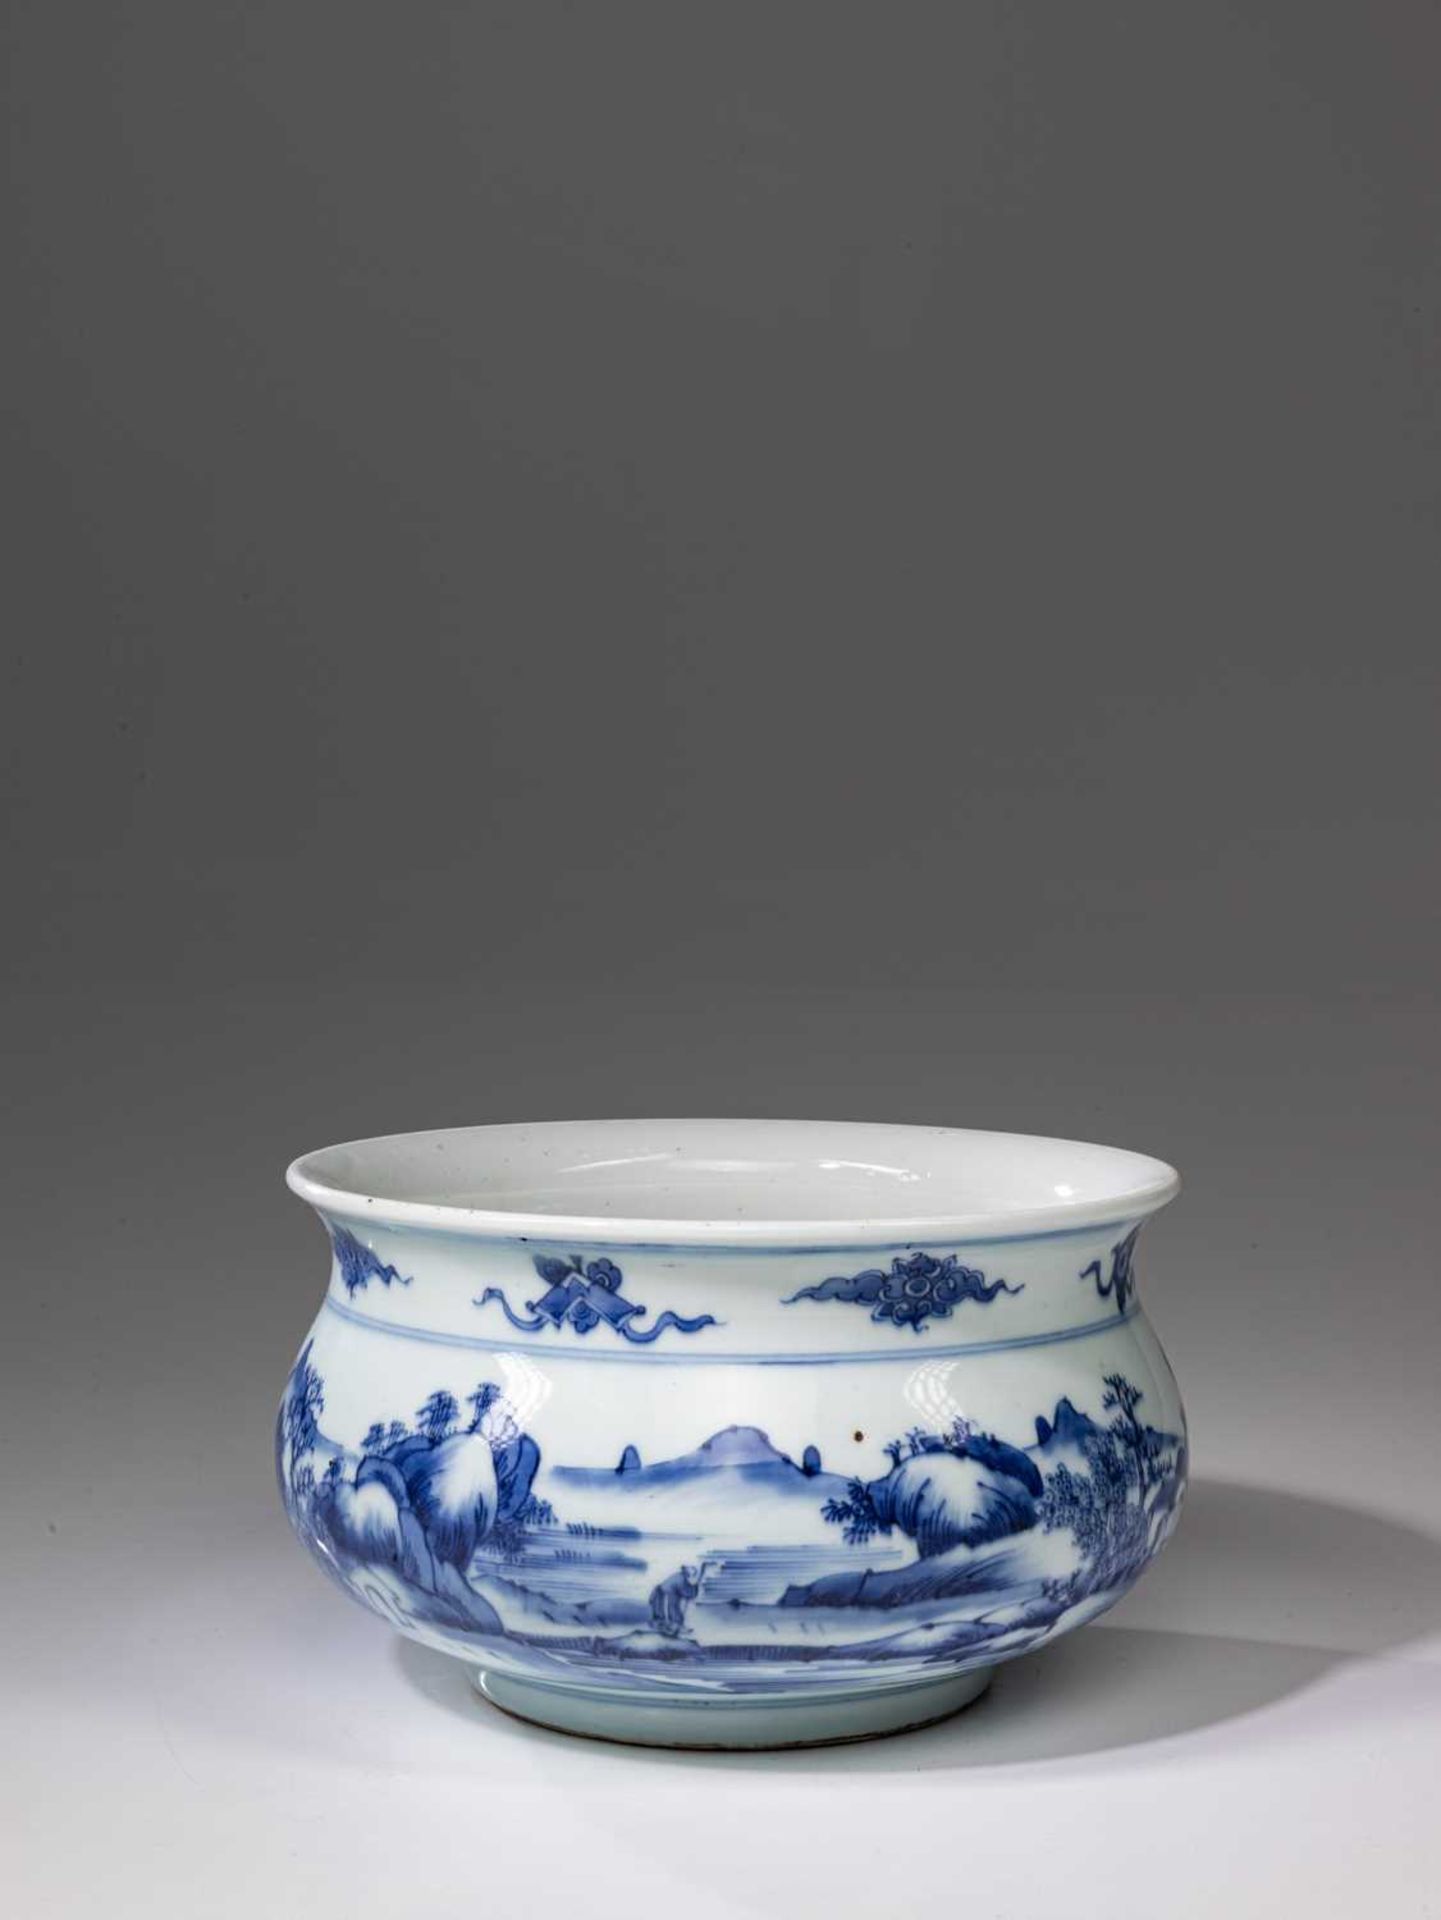 BLUE AND WHITE PORCELAIN - Image 3 of 5